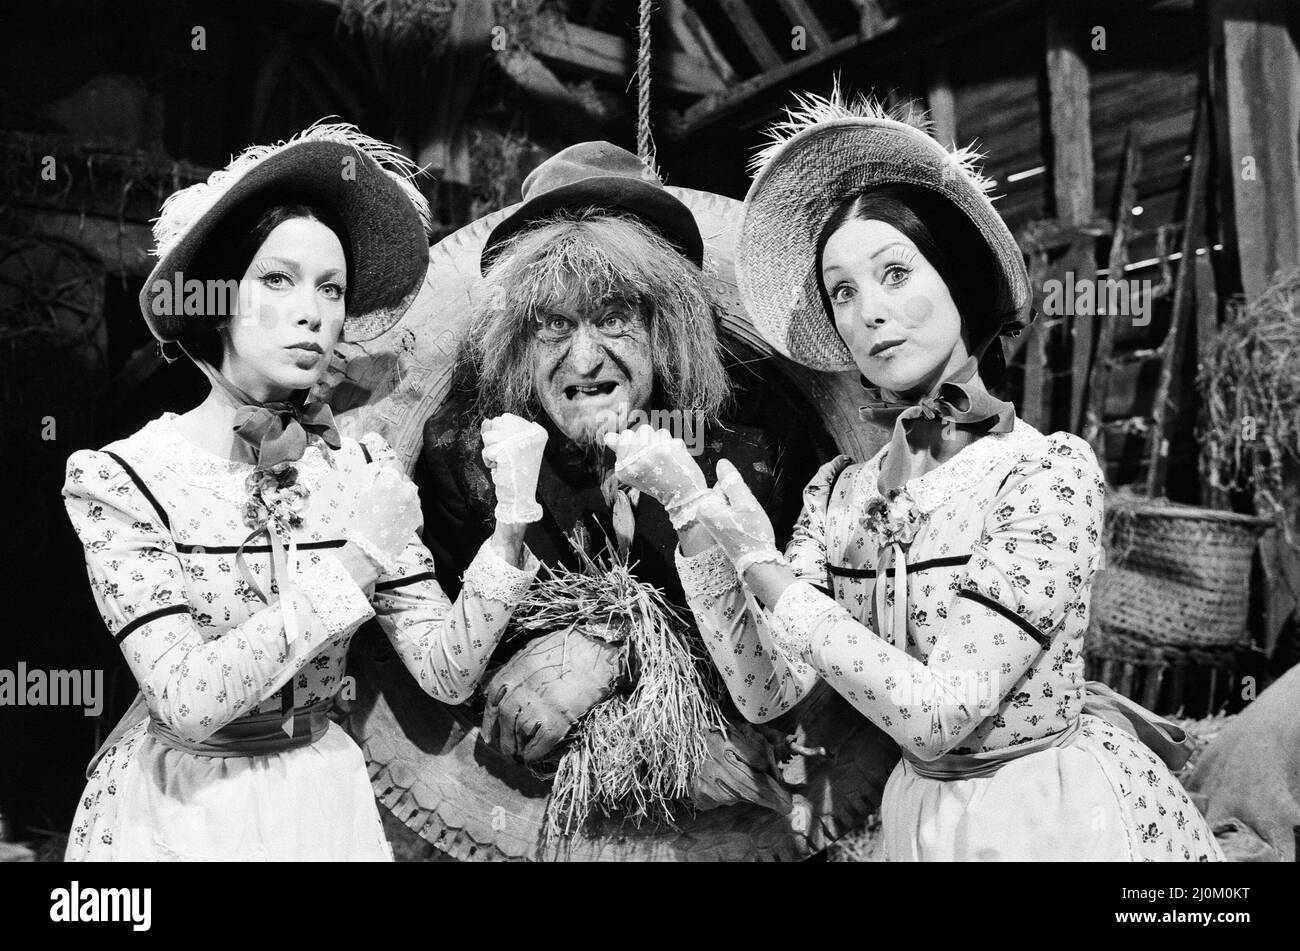 Children's television favourite, Worzel Gummidge, gets enough trouble from Aunt Sally but now coming on the scene is double trouble in the shape of Aunt Sally II. Worzel, played by Jon Pertwee, Aunt Sally by Una Stubbs (right) and Aunt Sally II by Connie Booth (left). 6th August 1981. Stock Photo